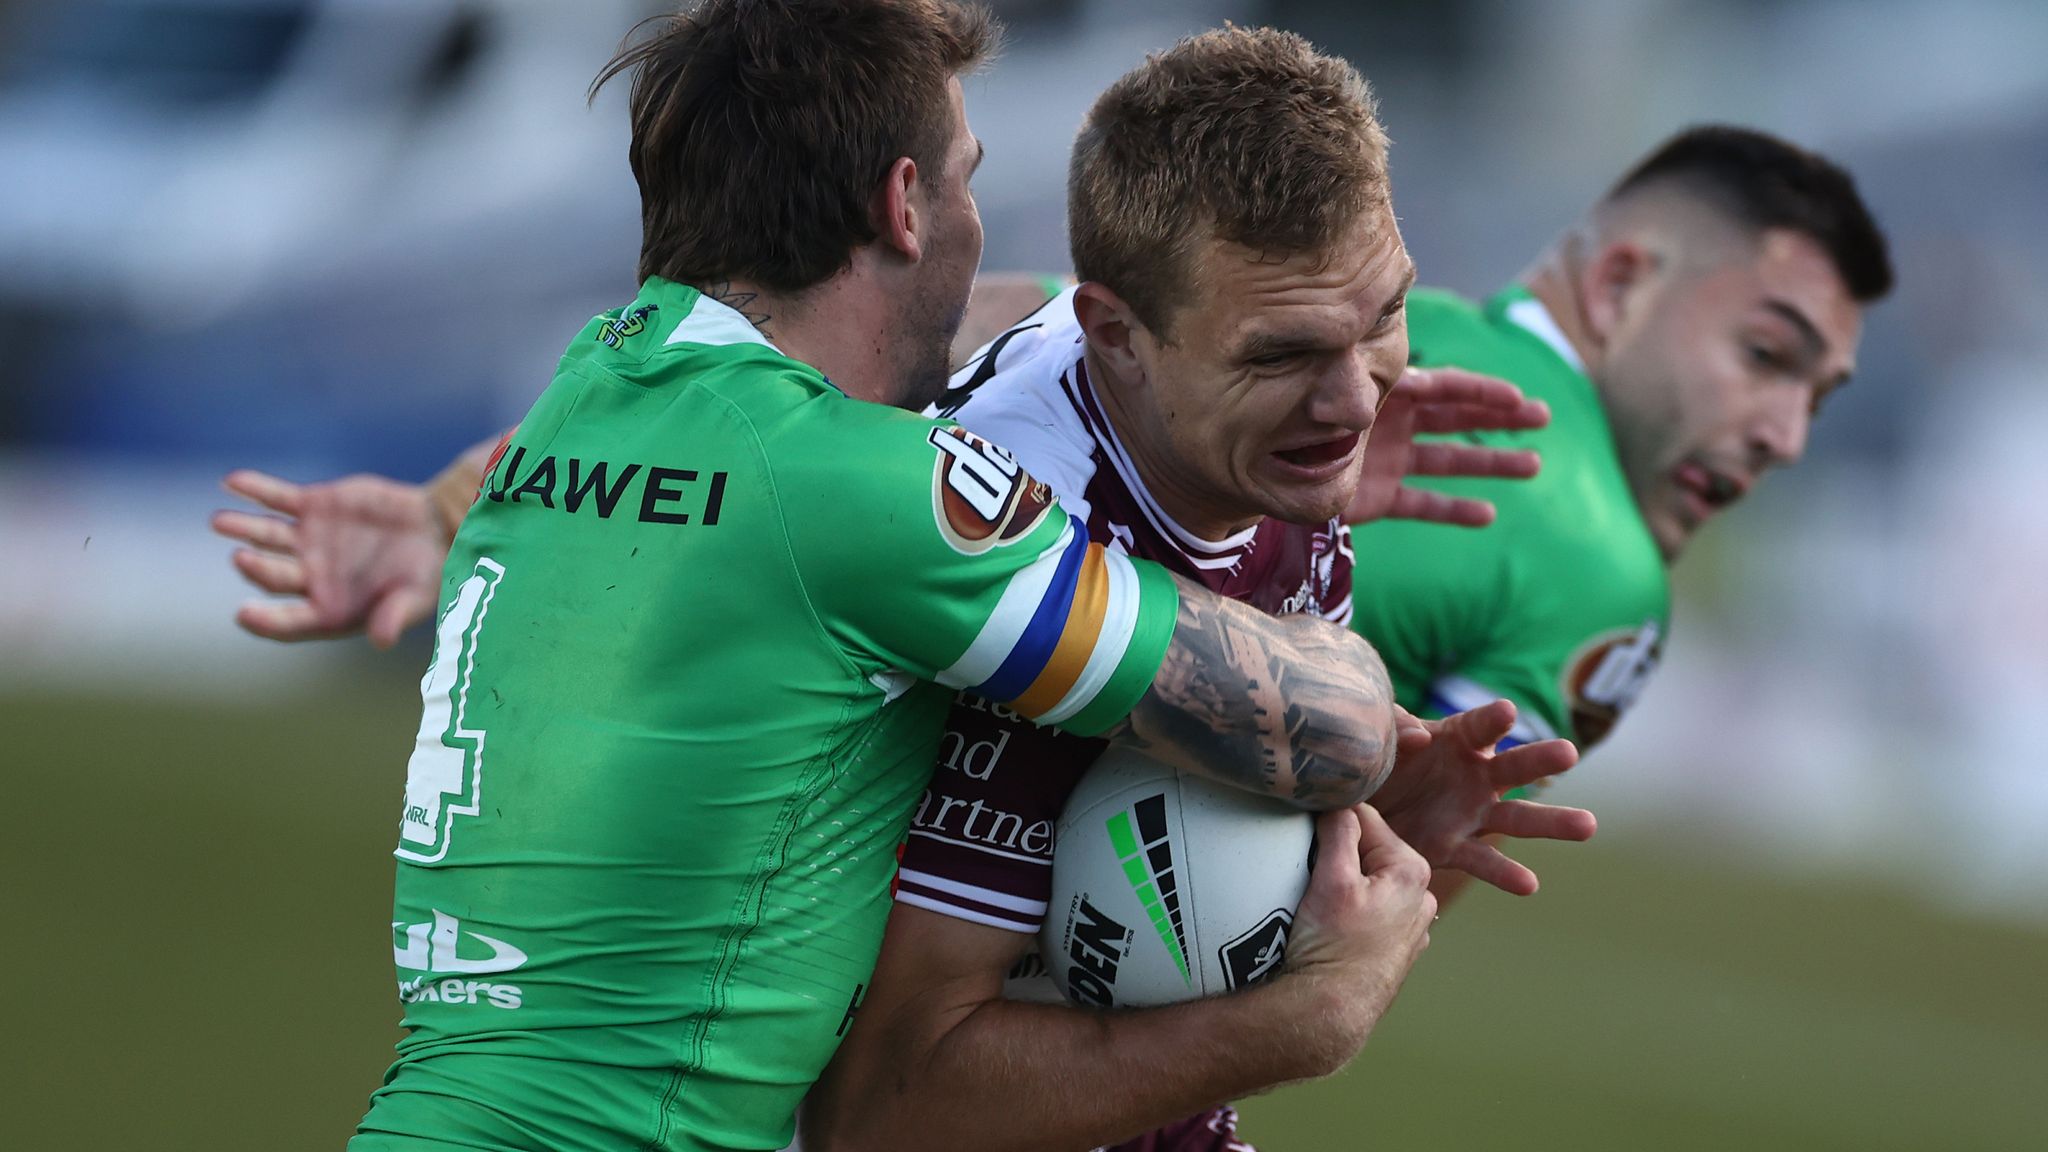 Sea Eagles soar and Sharks victorious